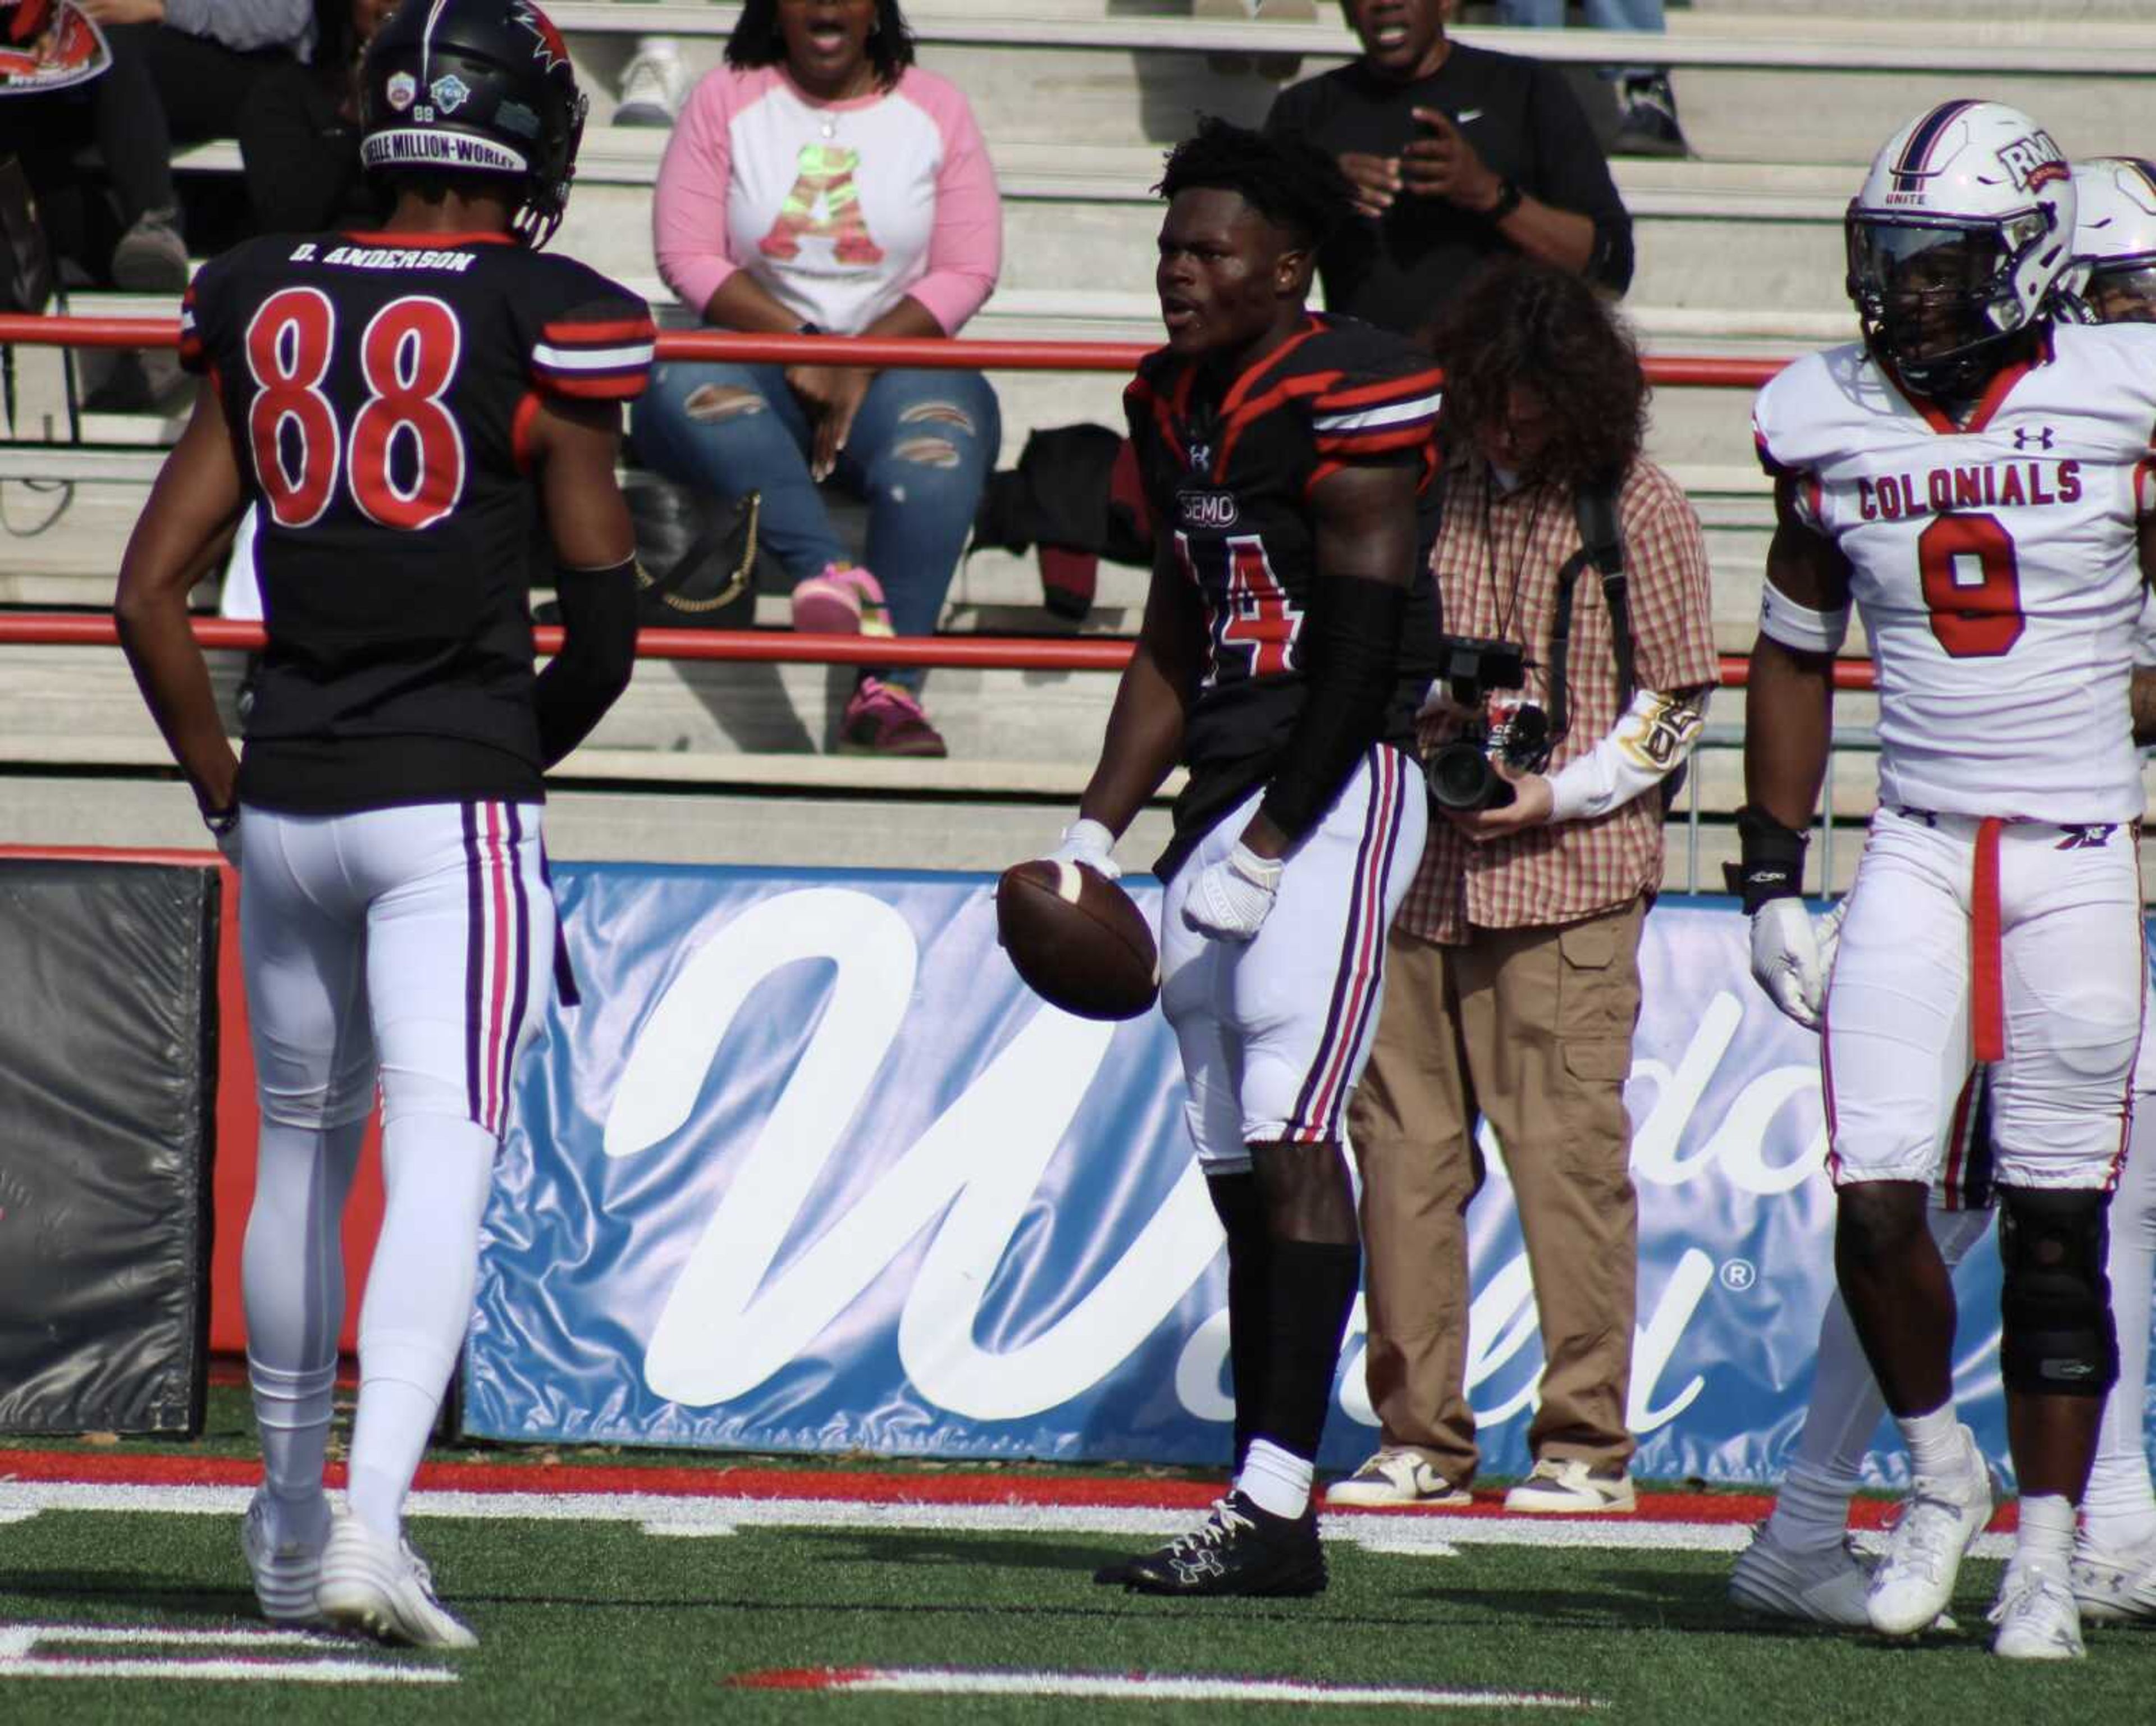 SEMO senior wide receiver Dalyn McDonald (14) celebrates after making a 32-yard contested catch against the Robert Morris Colonials at Houck Stadium on Nov. 4. The catch was McDonald's longest of the season.